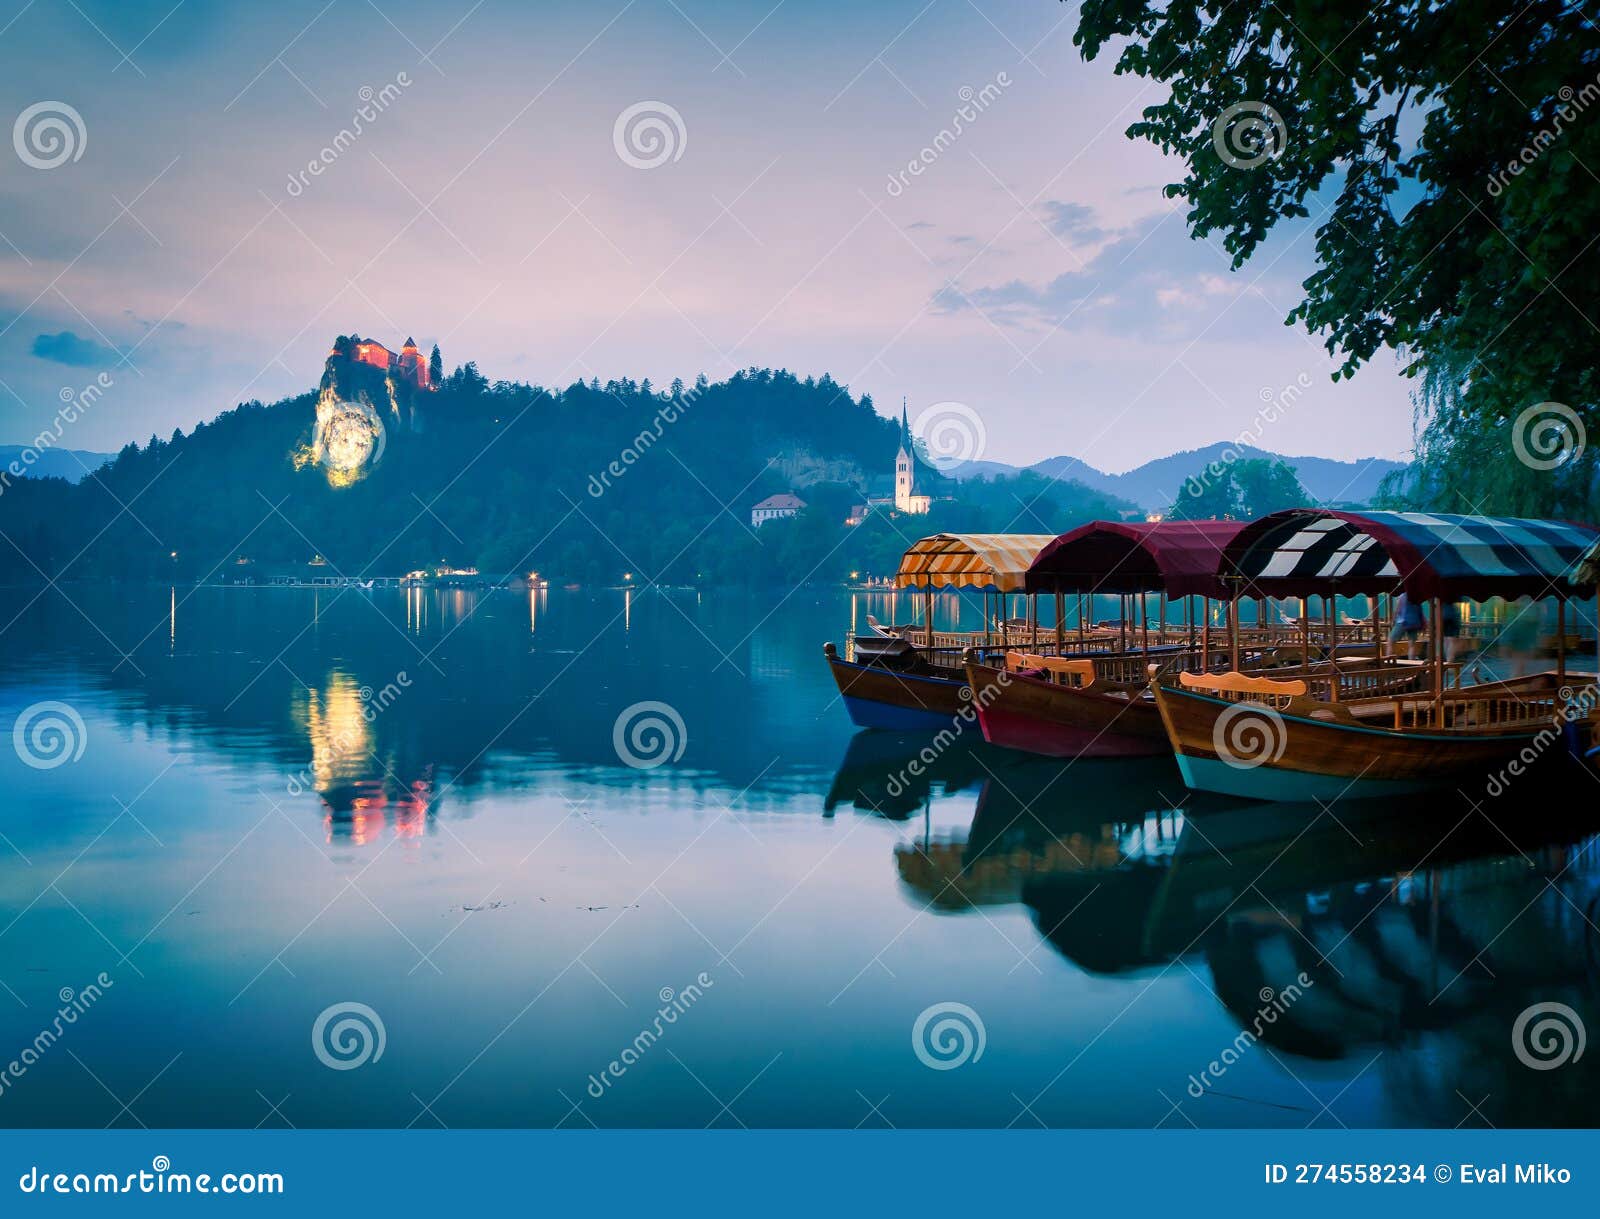 three lake tour boats standing on famous bled lake with castle on the background and island church. peaceful relaxing holiday